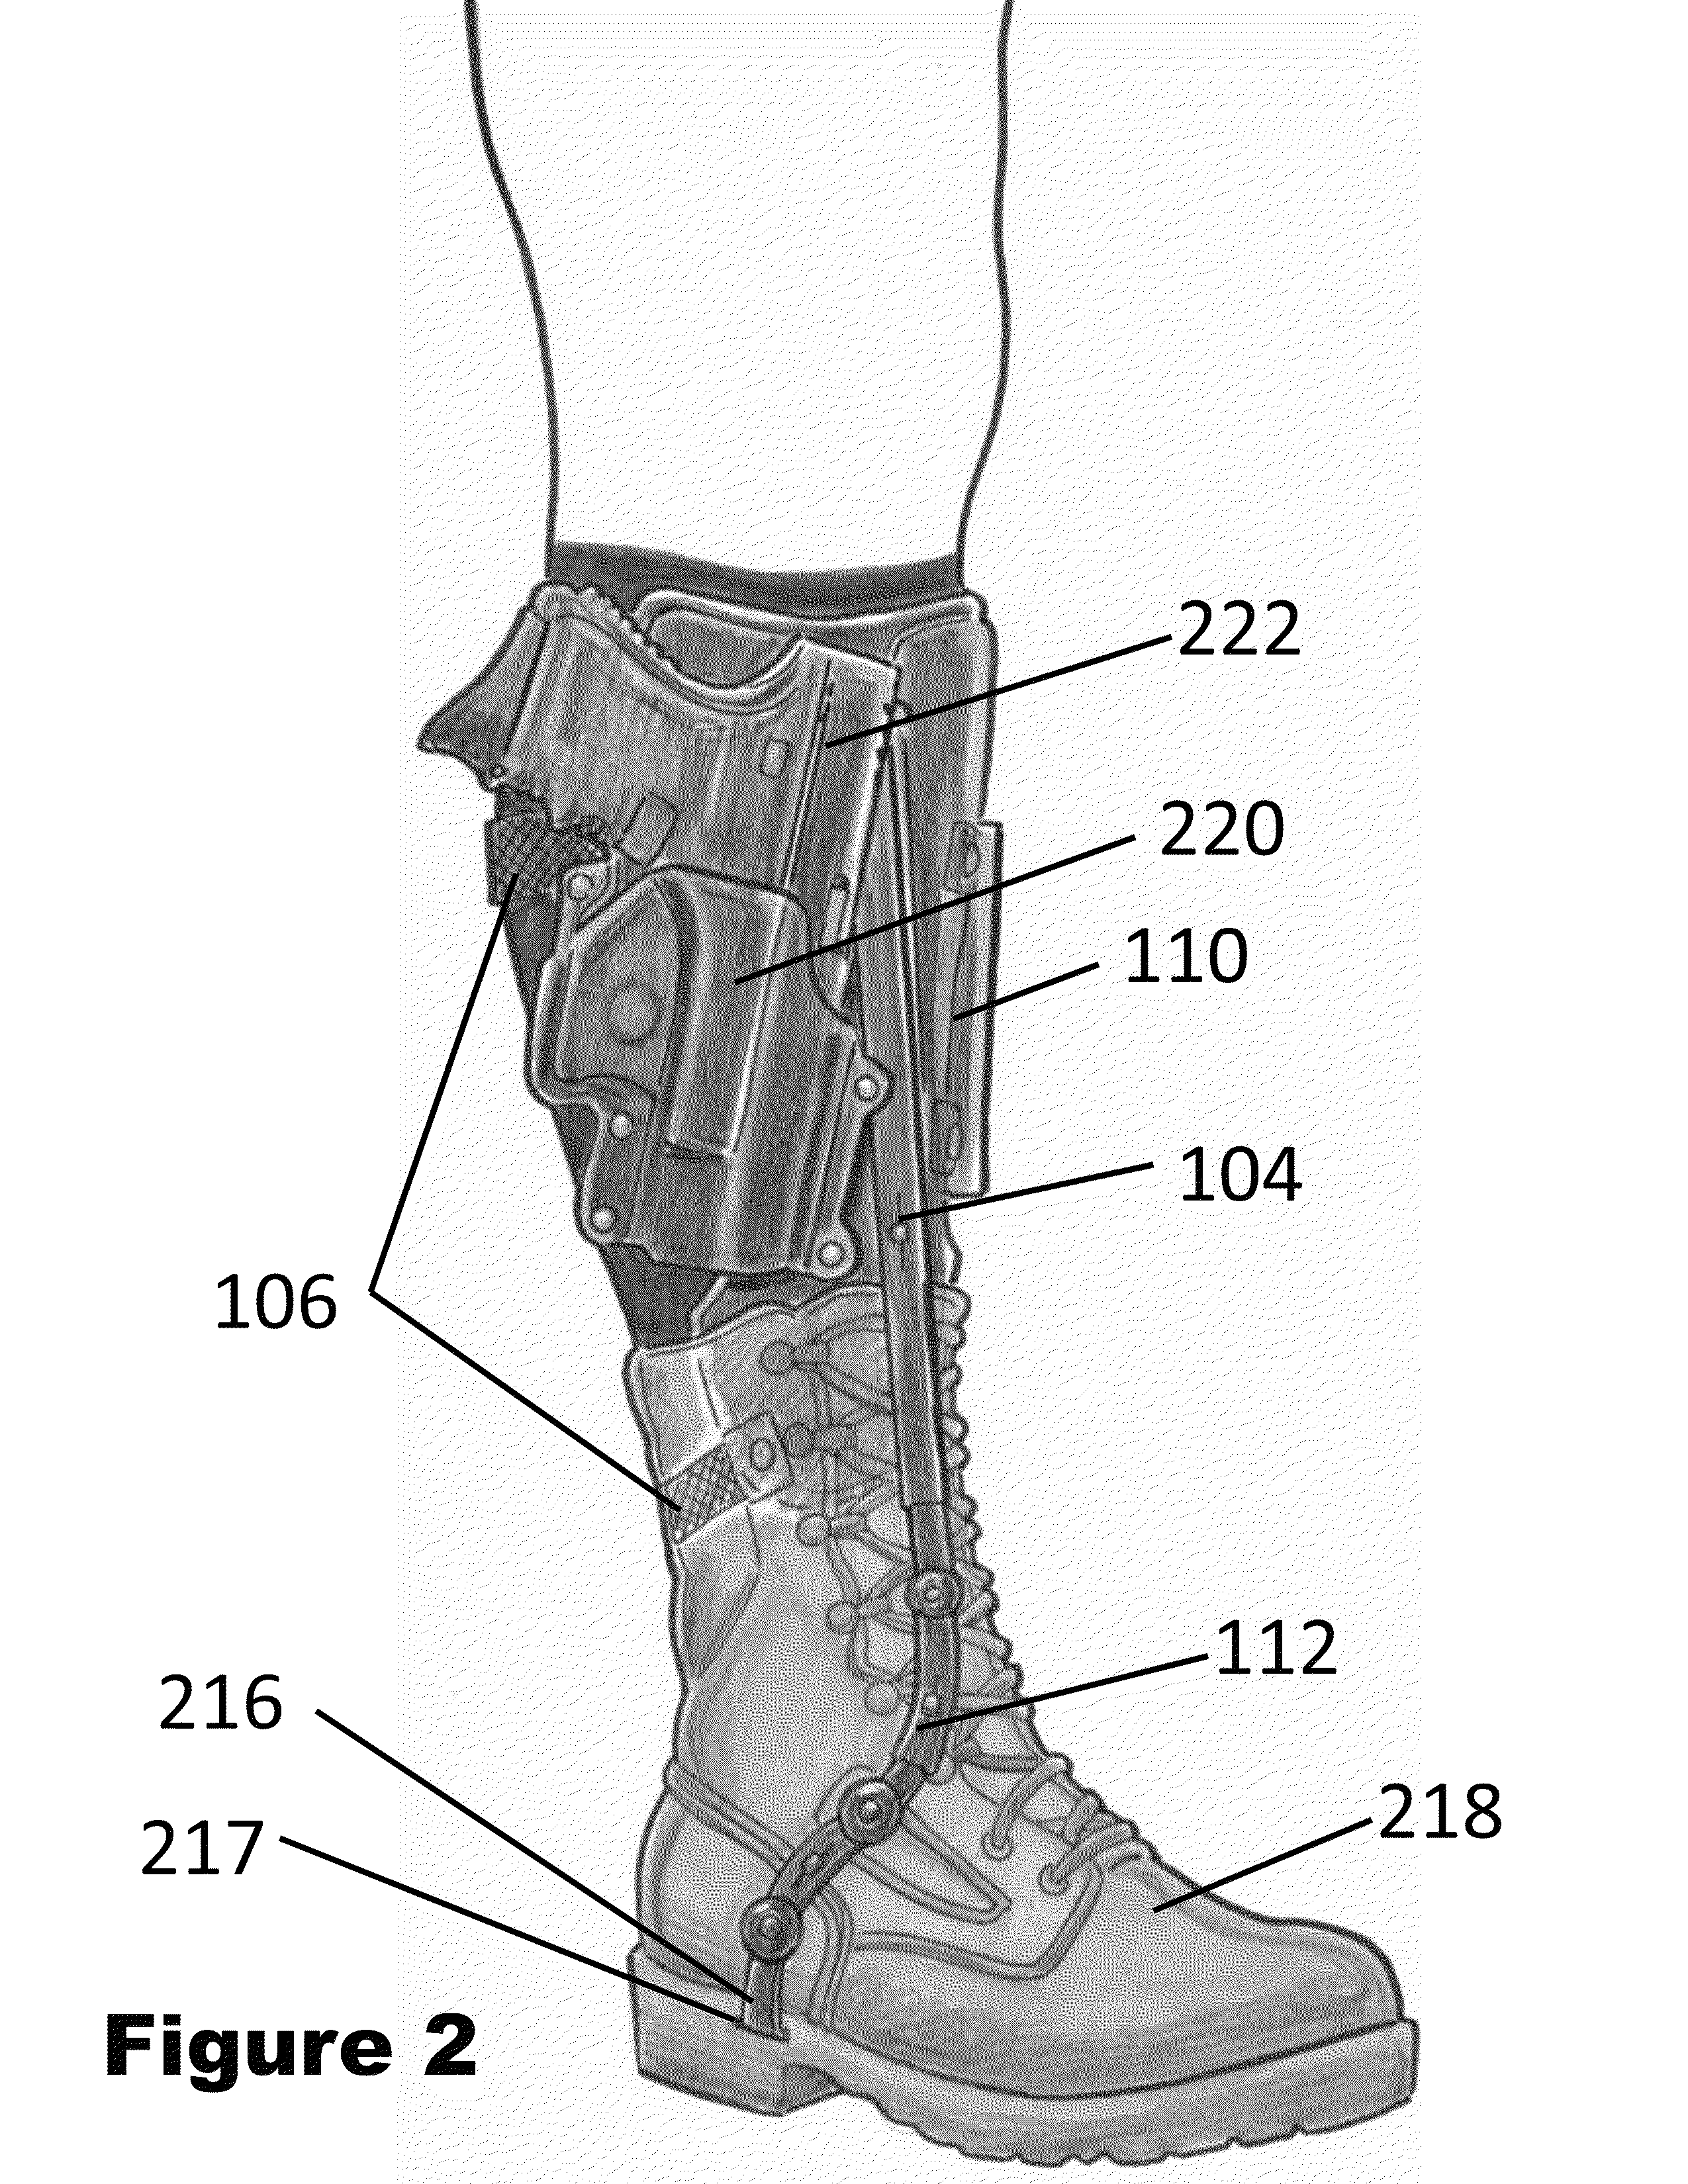 Ankle holster with foot orthosis and exoskeleton